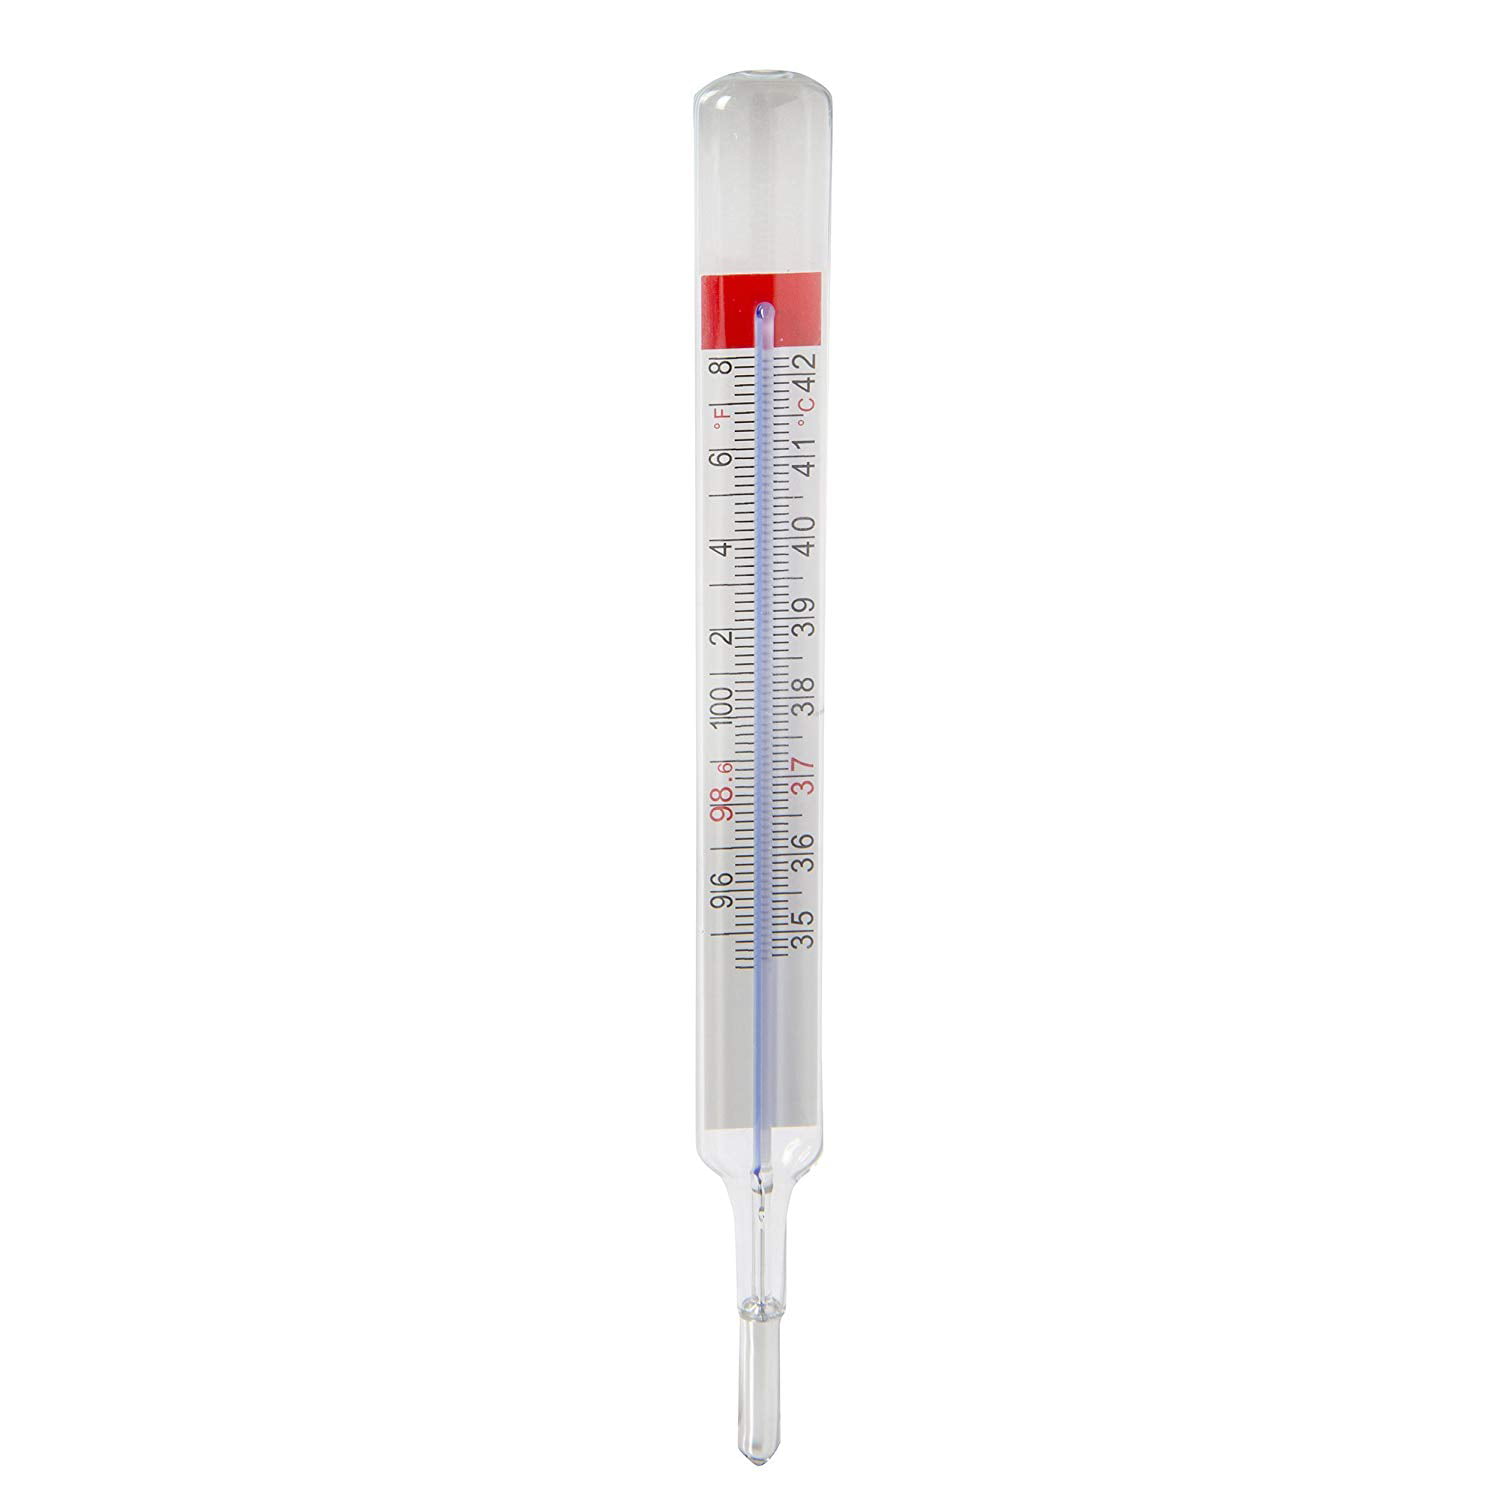 Dual Scale Geratherm Classic Rectal Red Clinical Glass Mercury-Free Thermometer